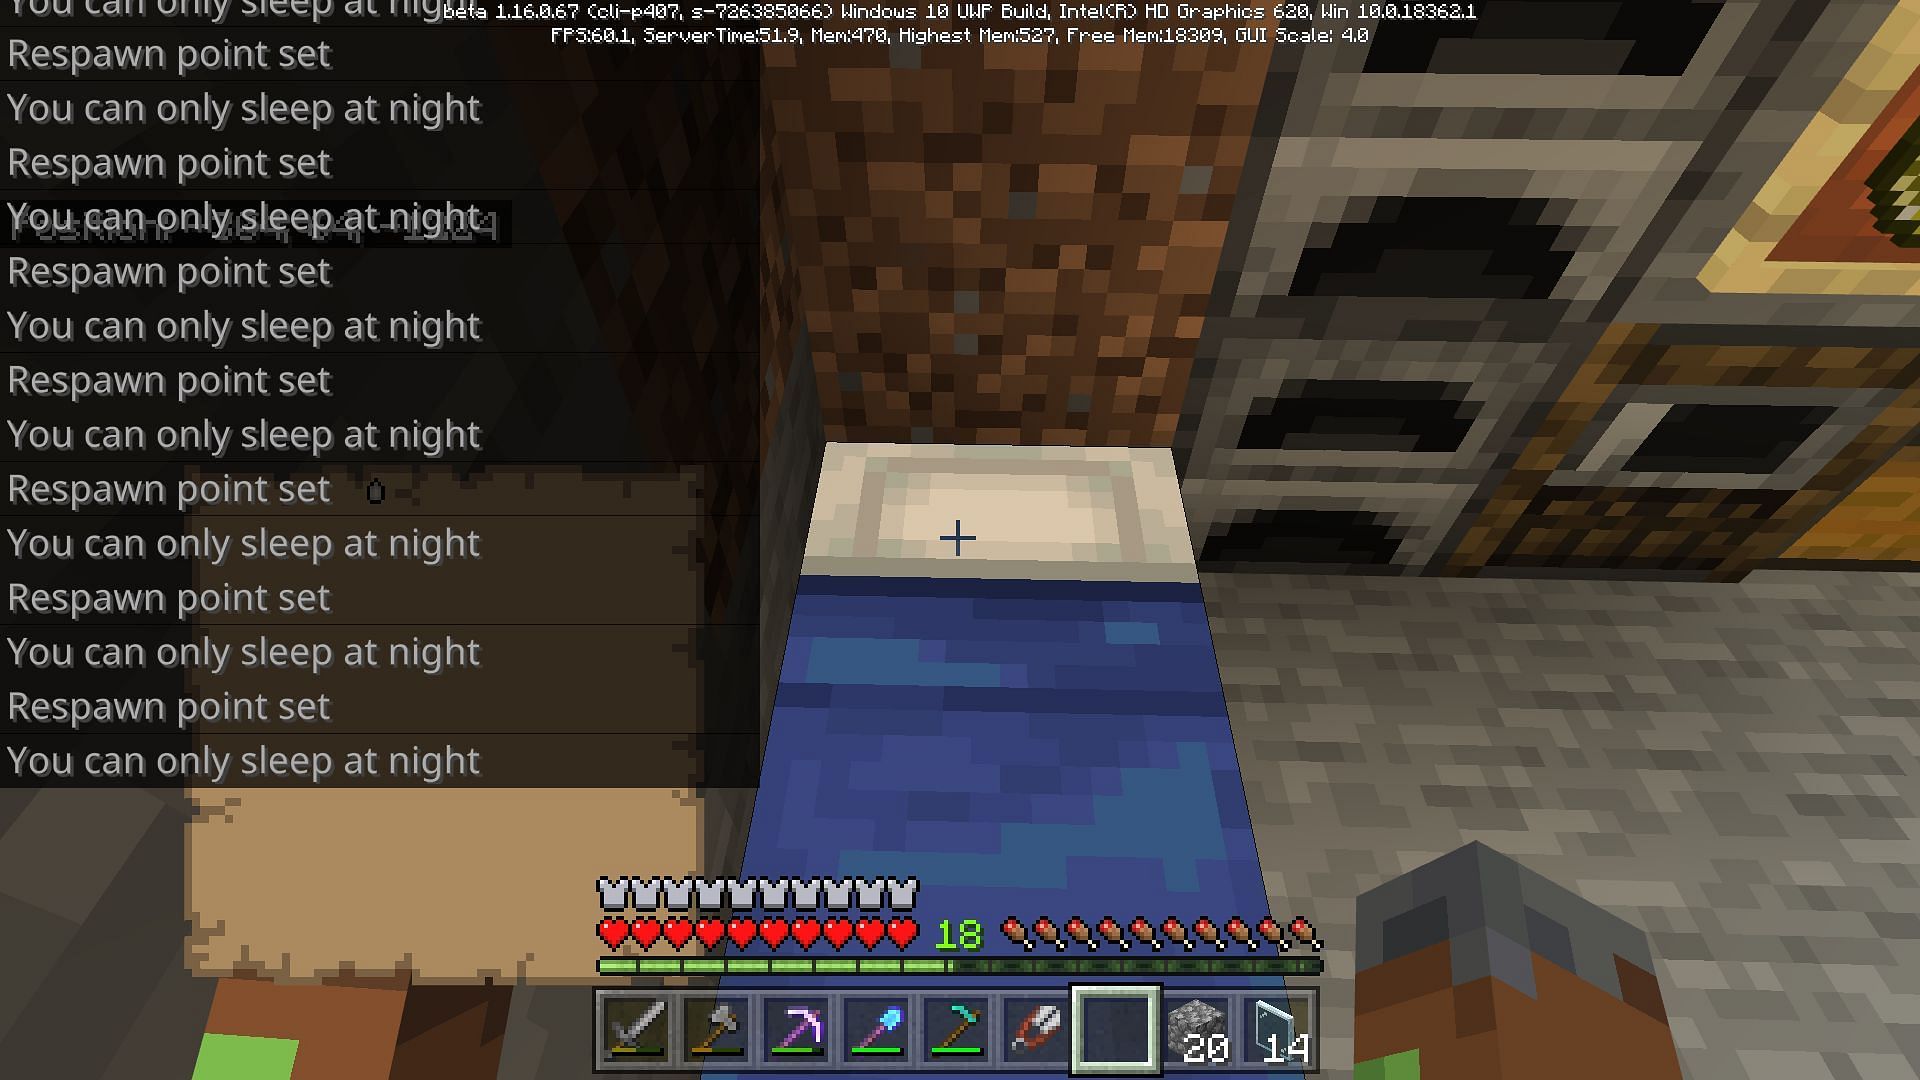 Respawn point set on a bed (Image via Minecraft)